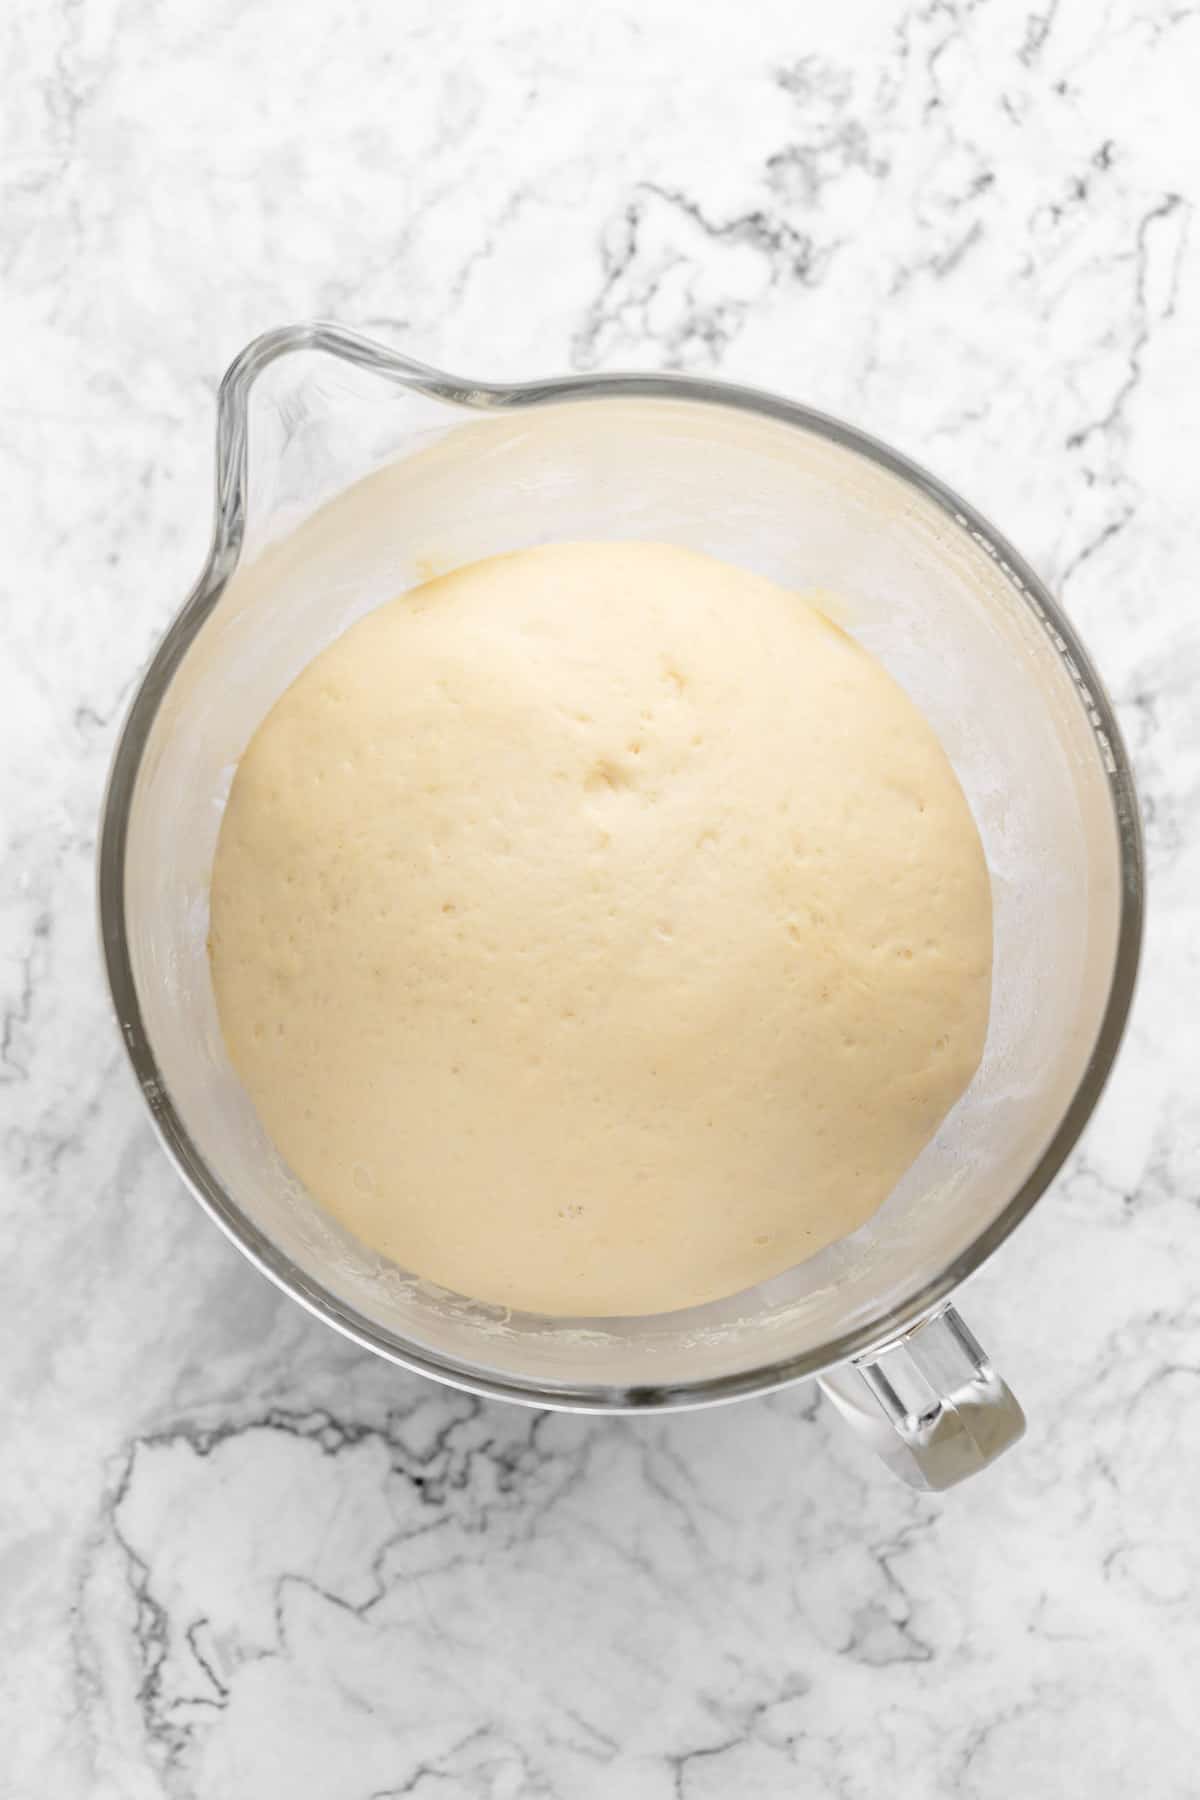 Overhead view of dough in glass mixing bowl